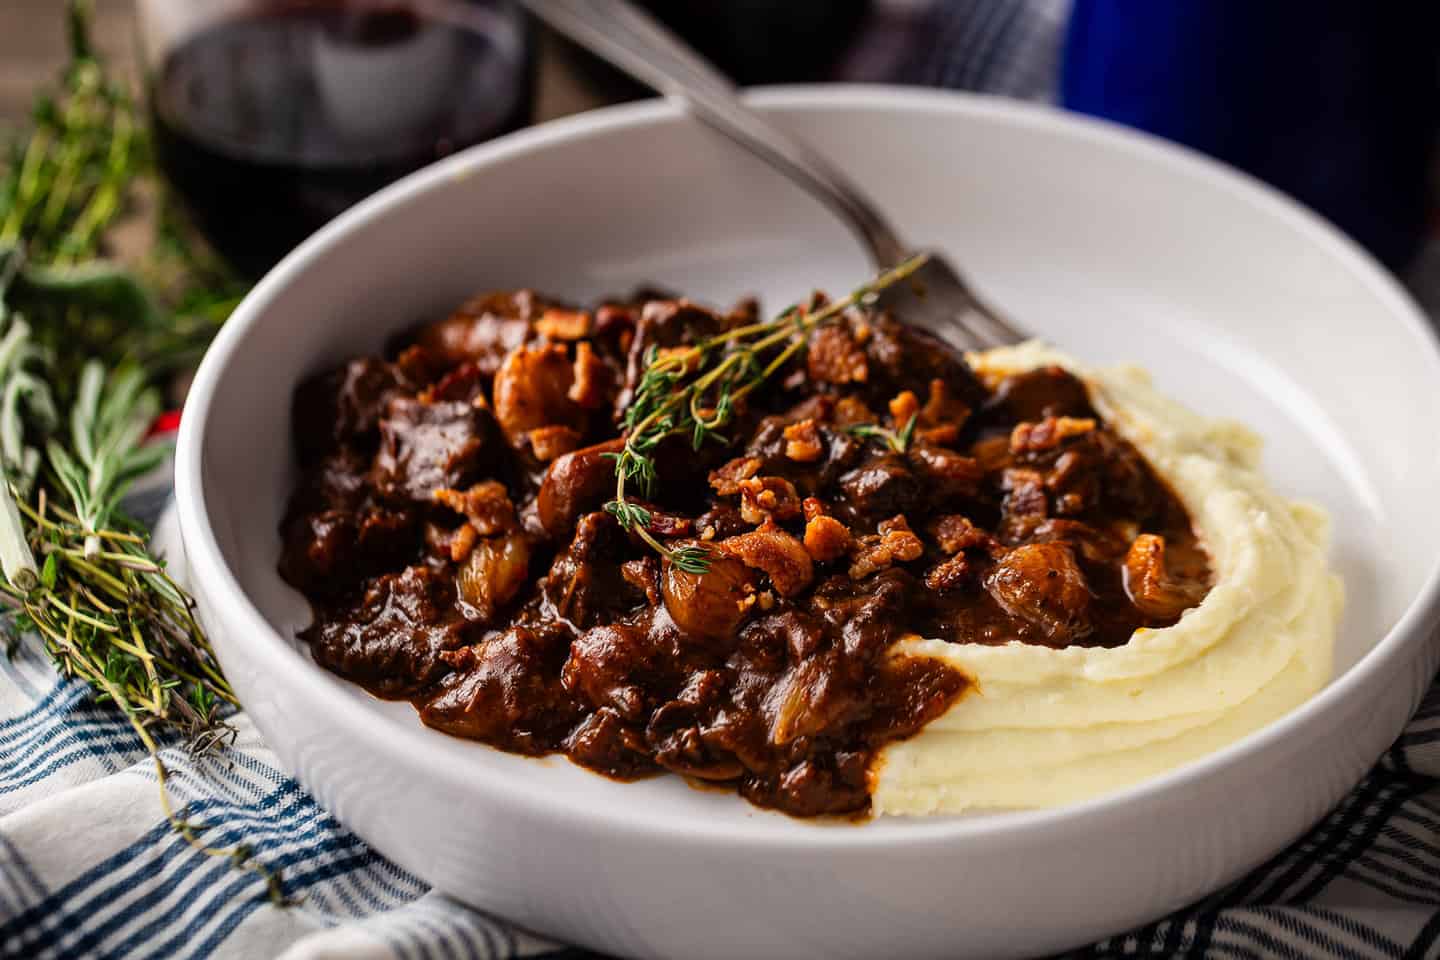 Julia Child inspired beef bourguignon recipe, made with aromatic herbs and spooned into a shallow bowl.